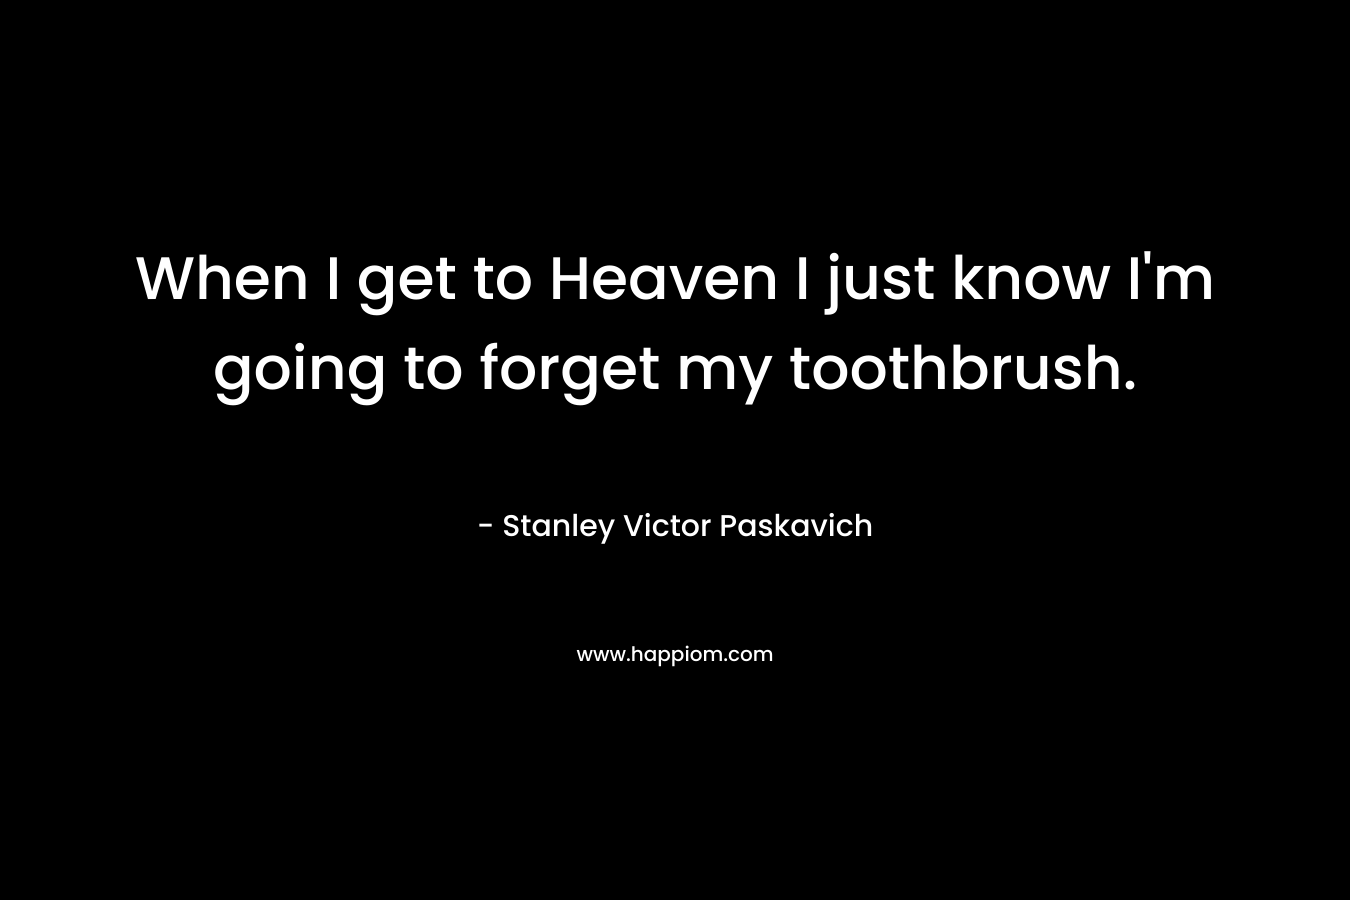 When I get to Heaven I just know I’m going to forget my toothbrush. – Stanley Victor Paskavich